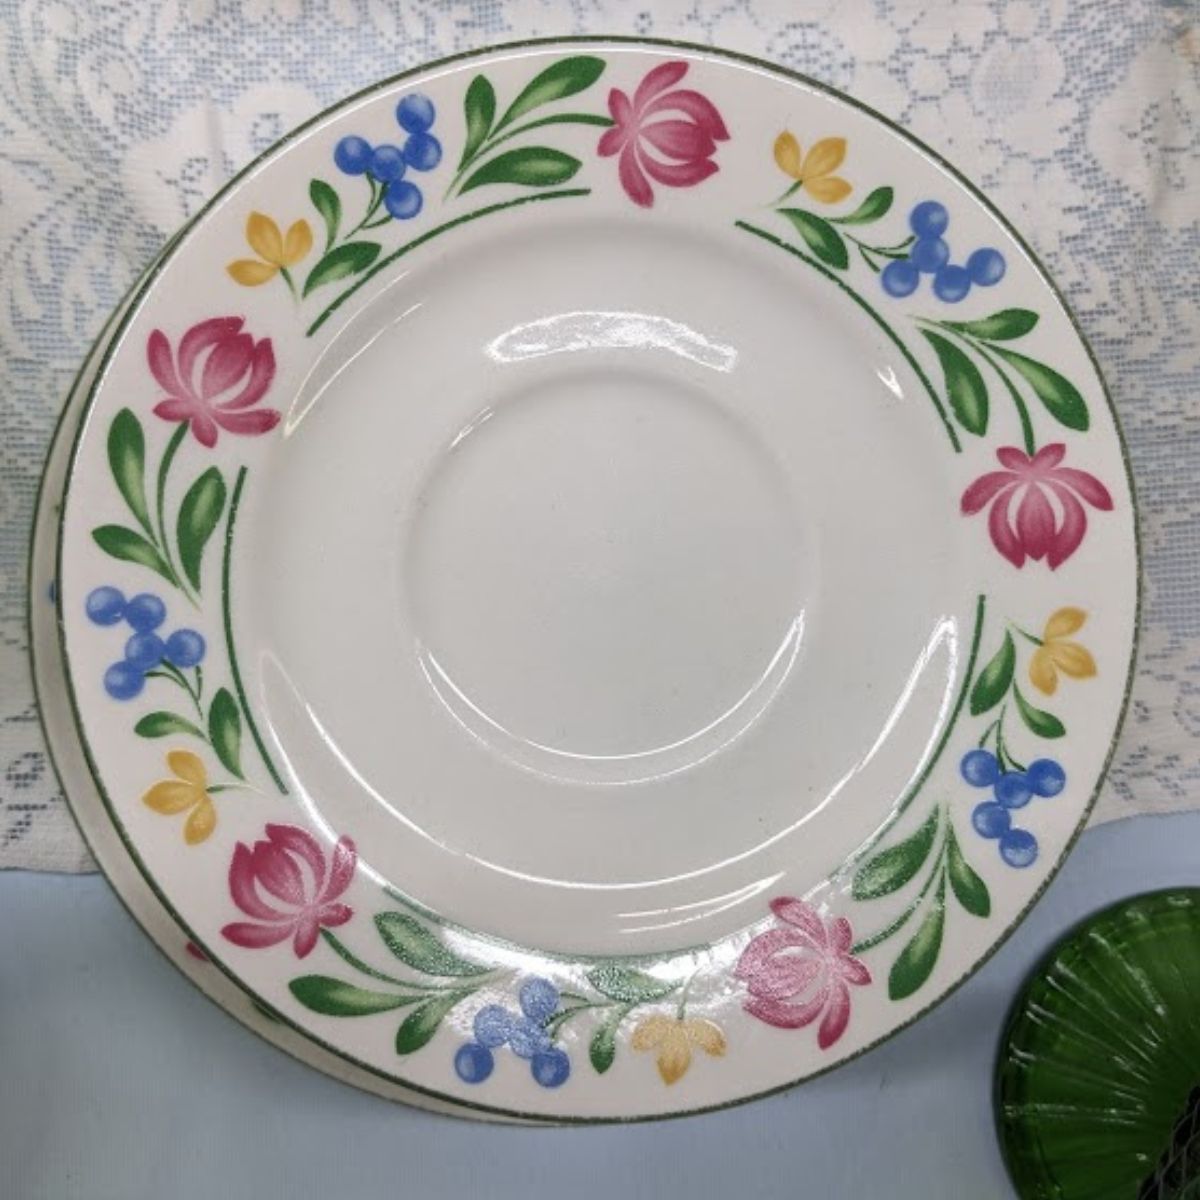 White plates with a colorful flower motif. 